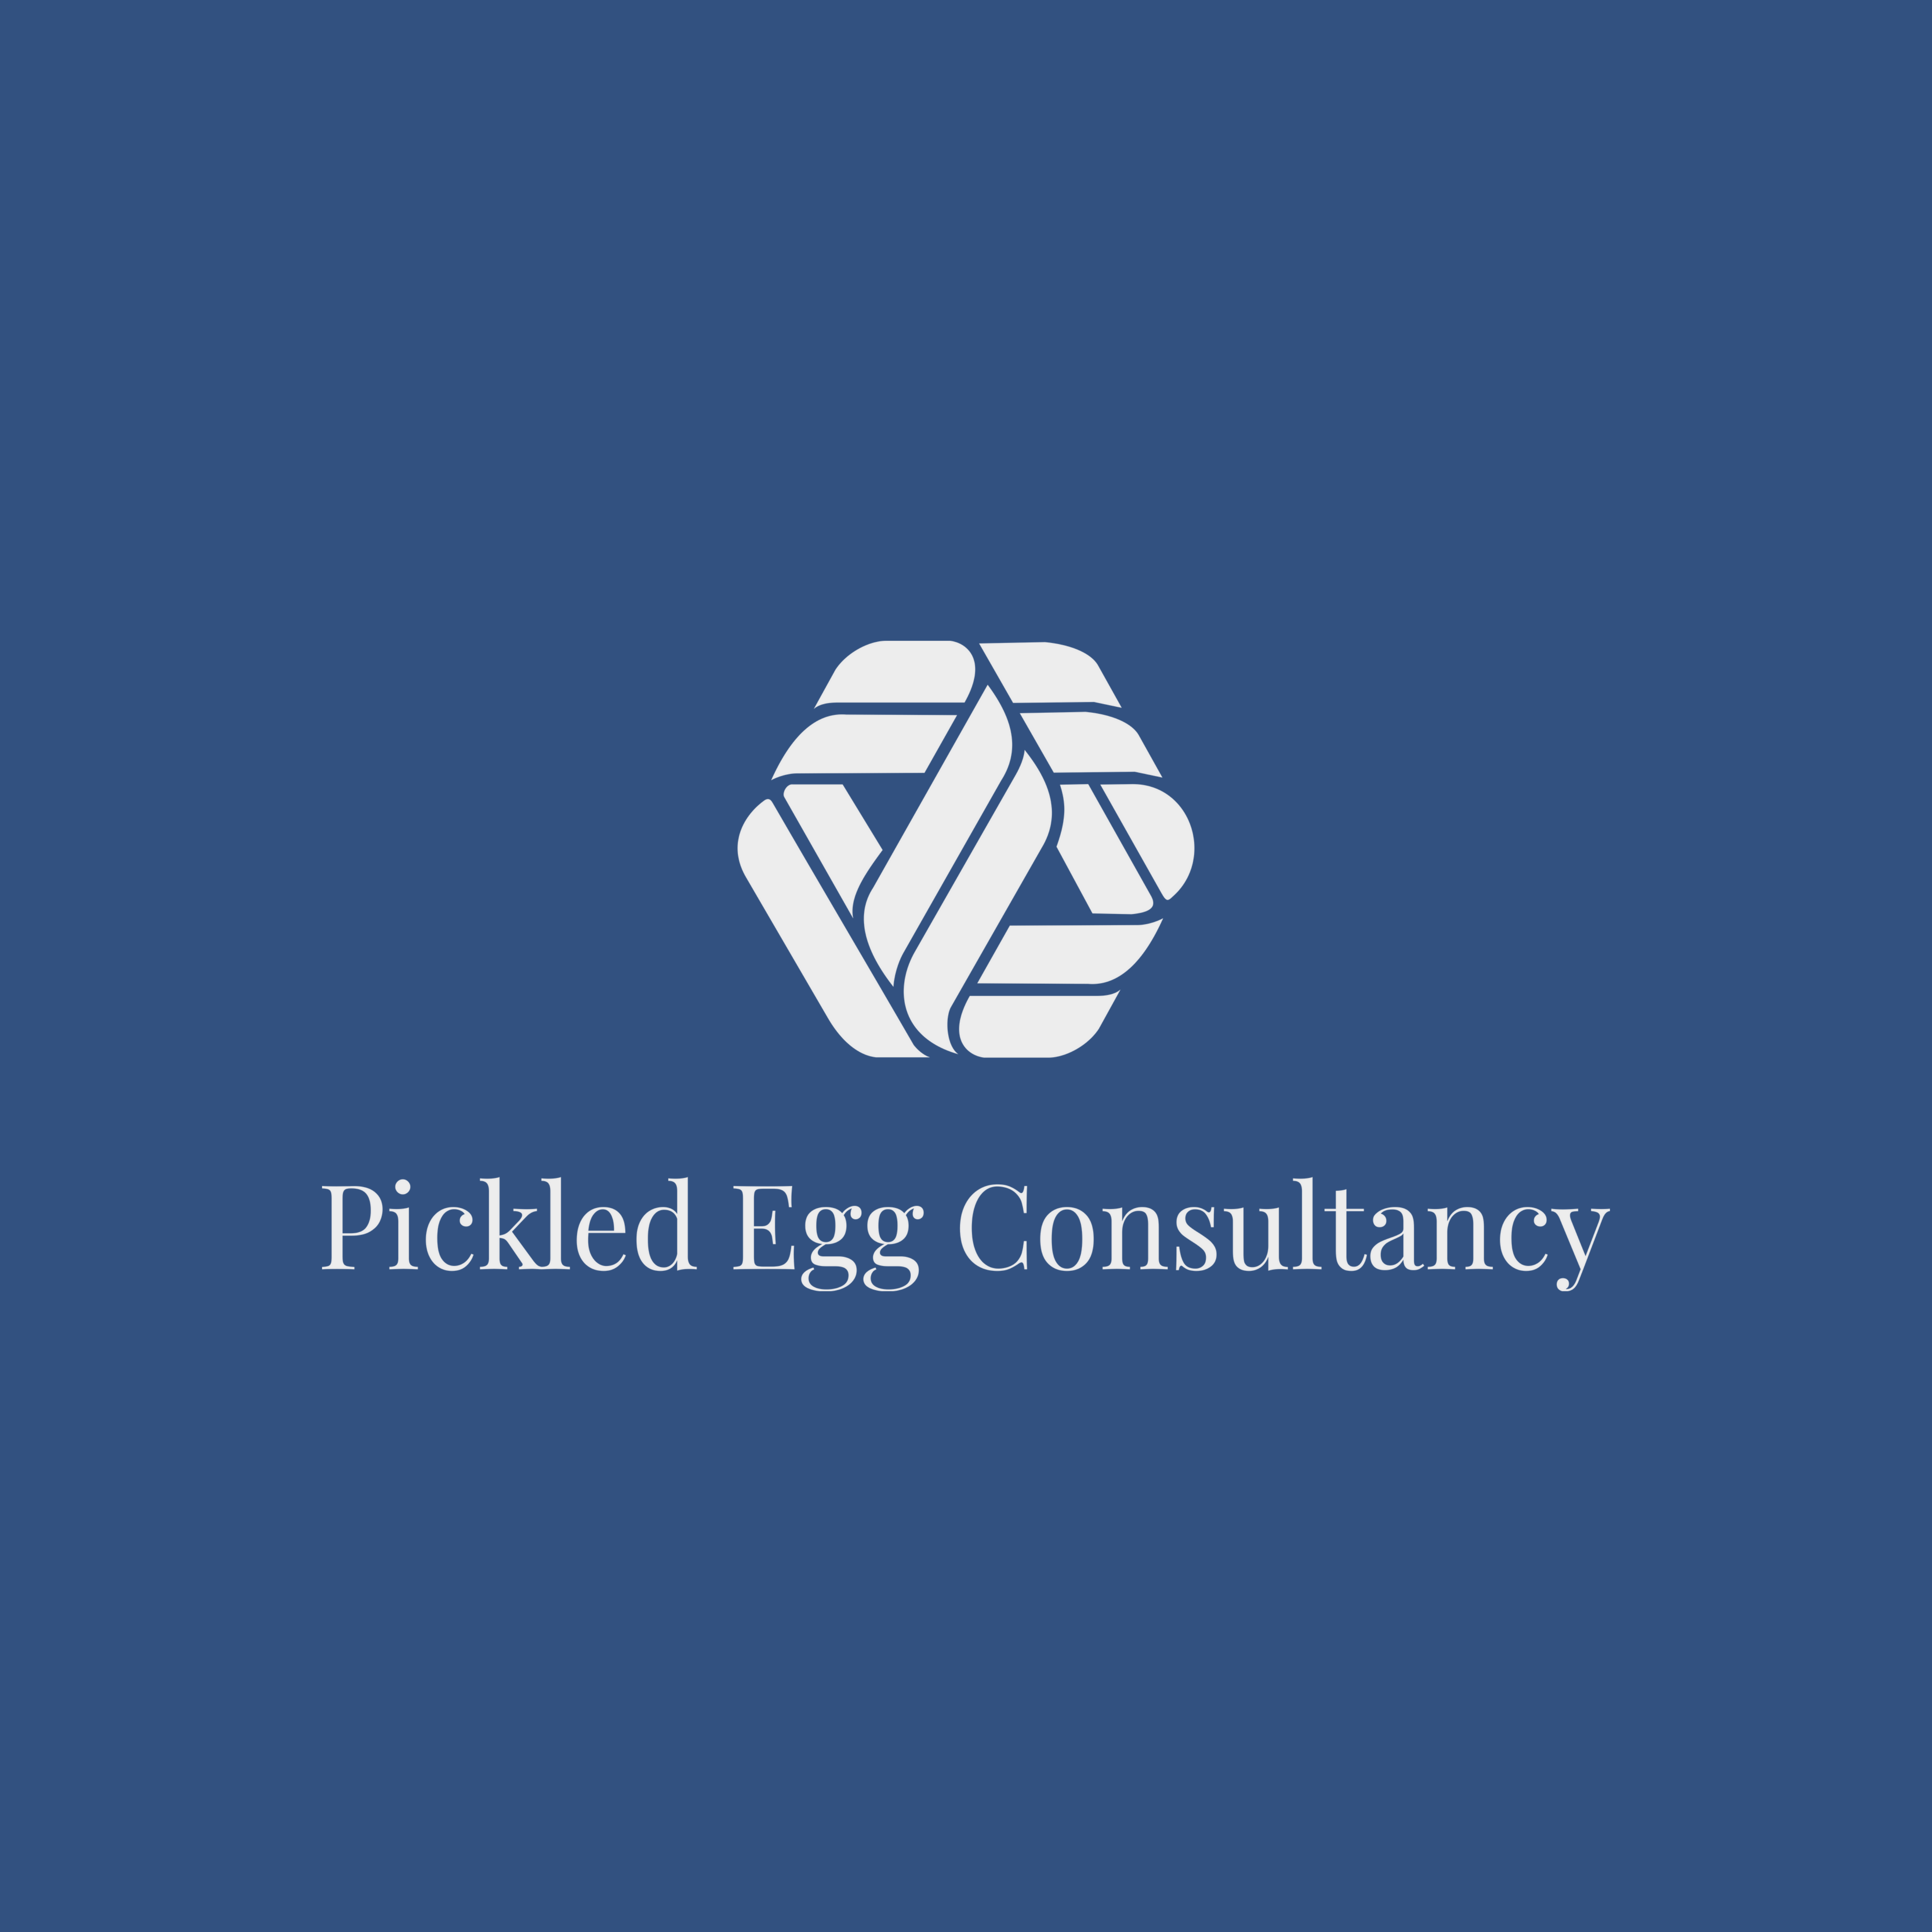 Pickled Egg Consultancy Logo is a never ending knot symbolising the complexity of business challenges that we can help to unravel